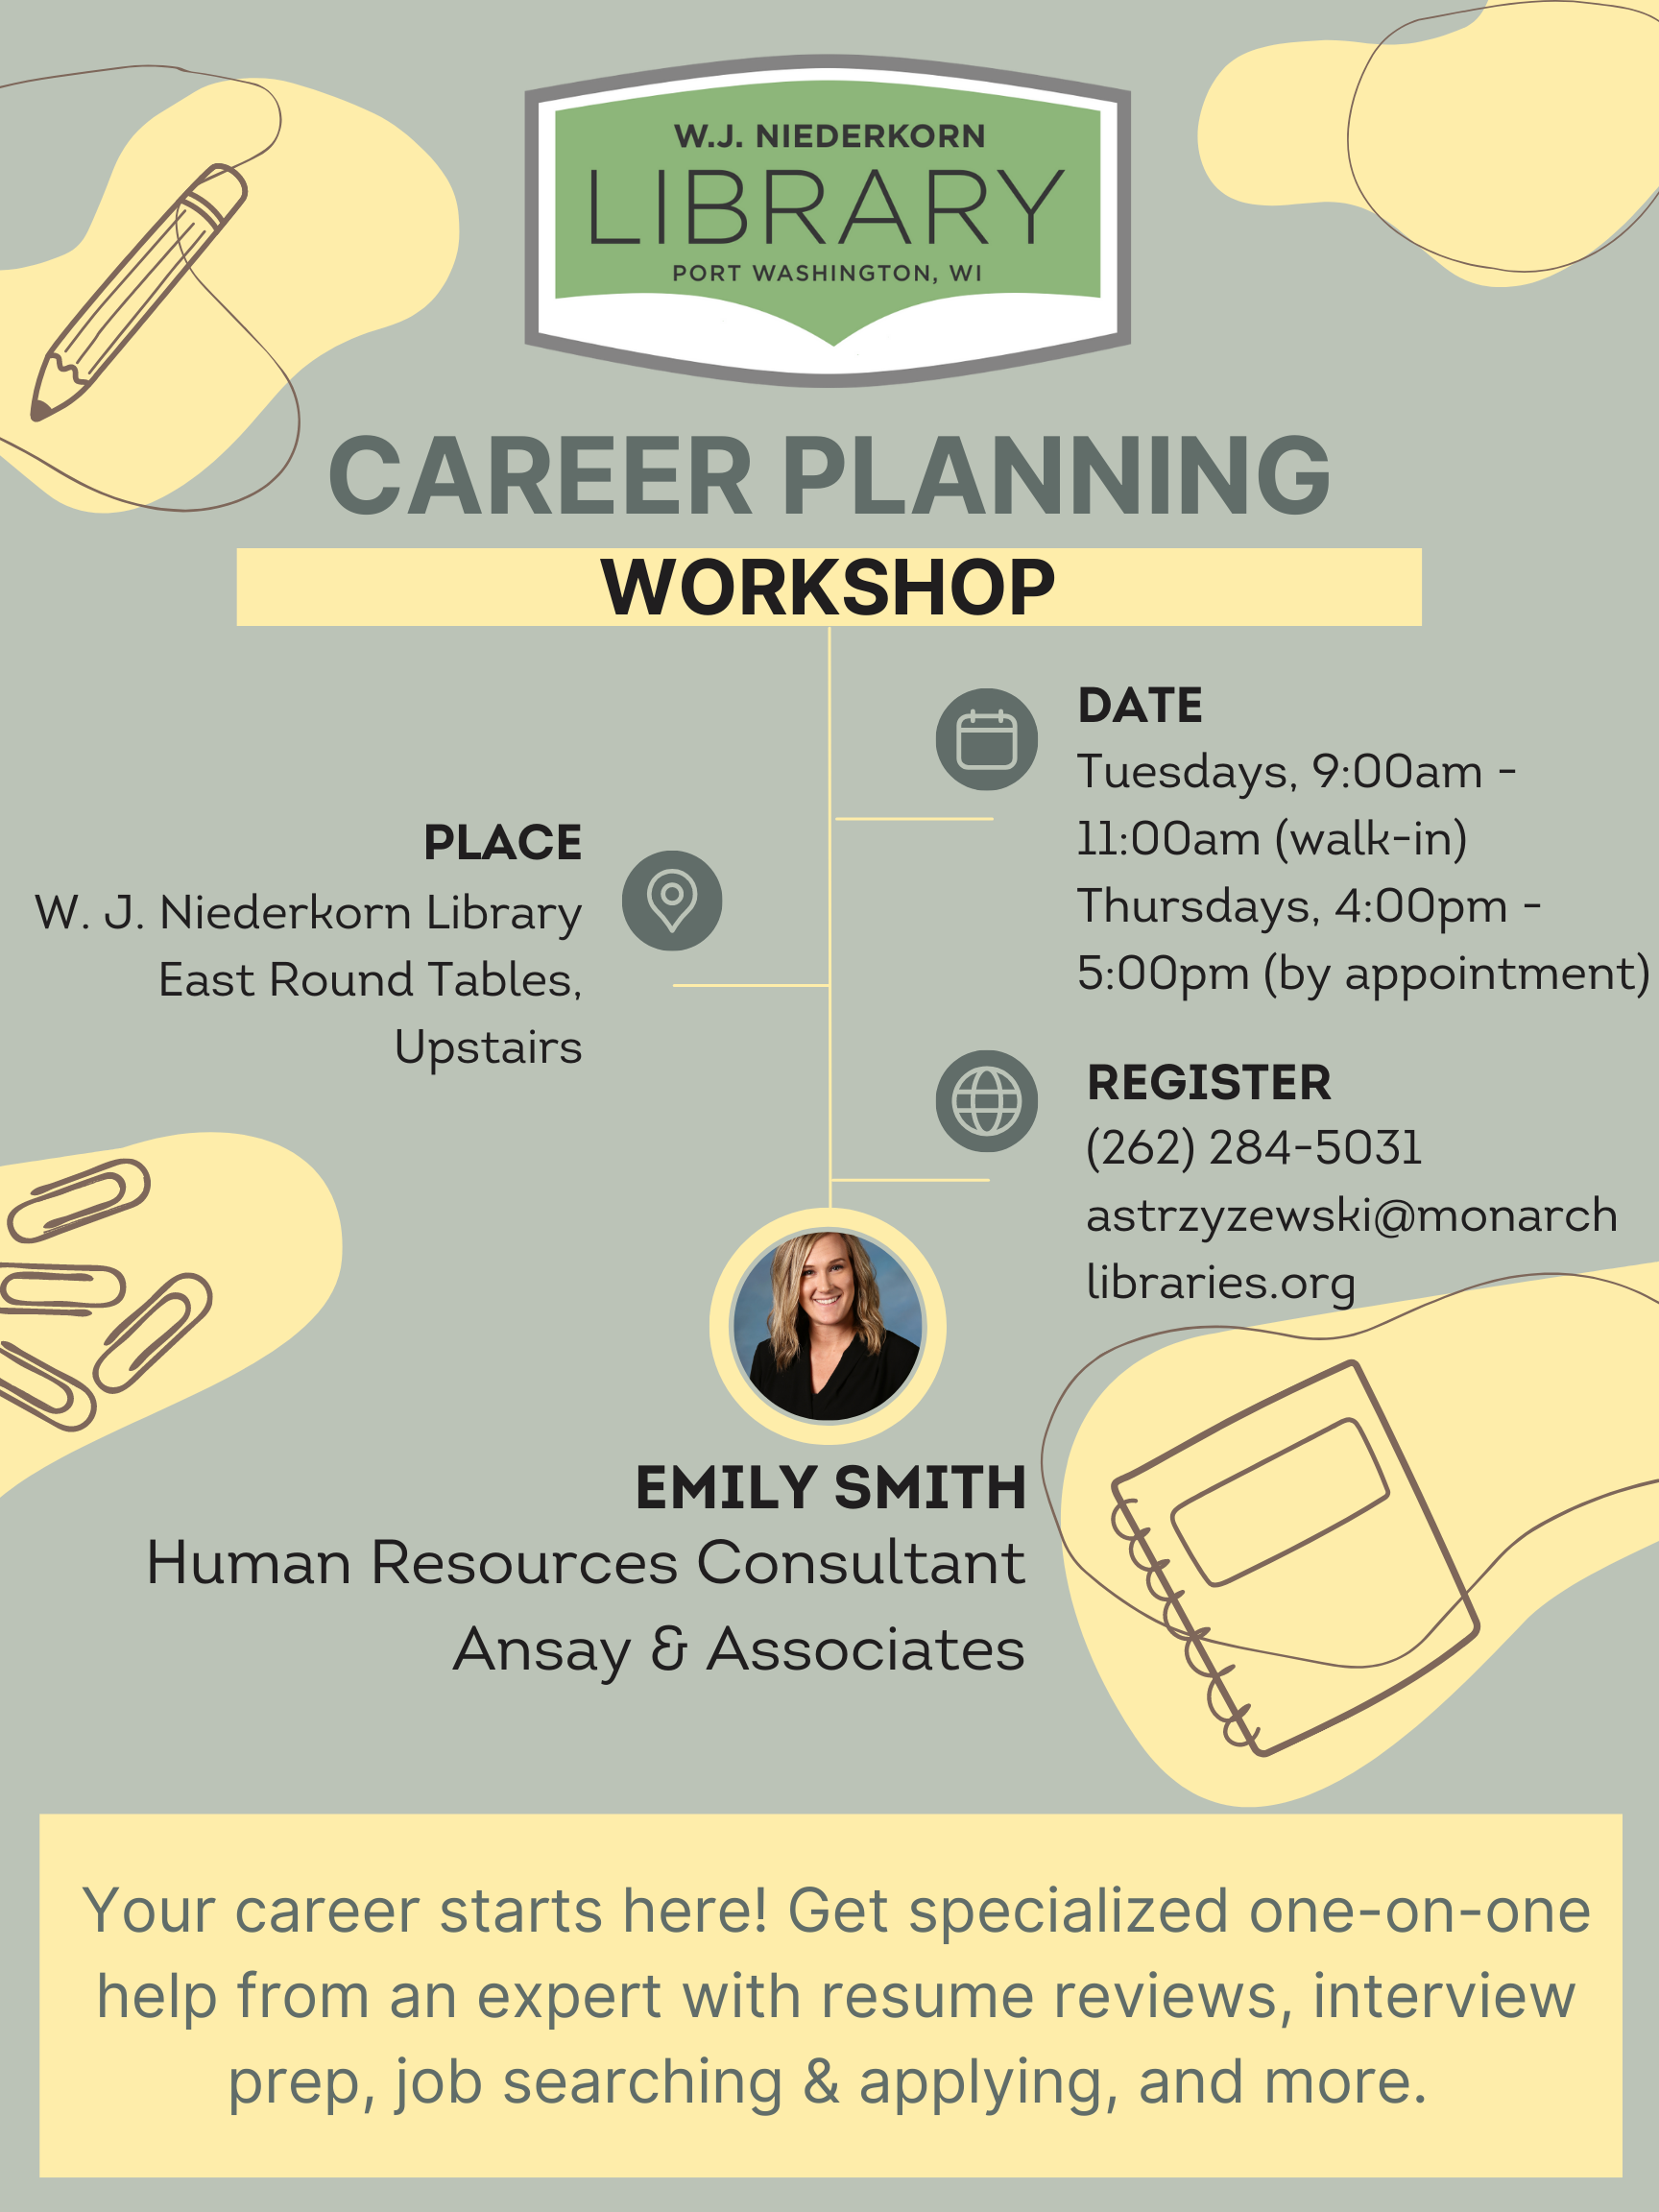 Career Planning Poster - Tuesdays